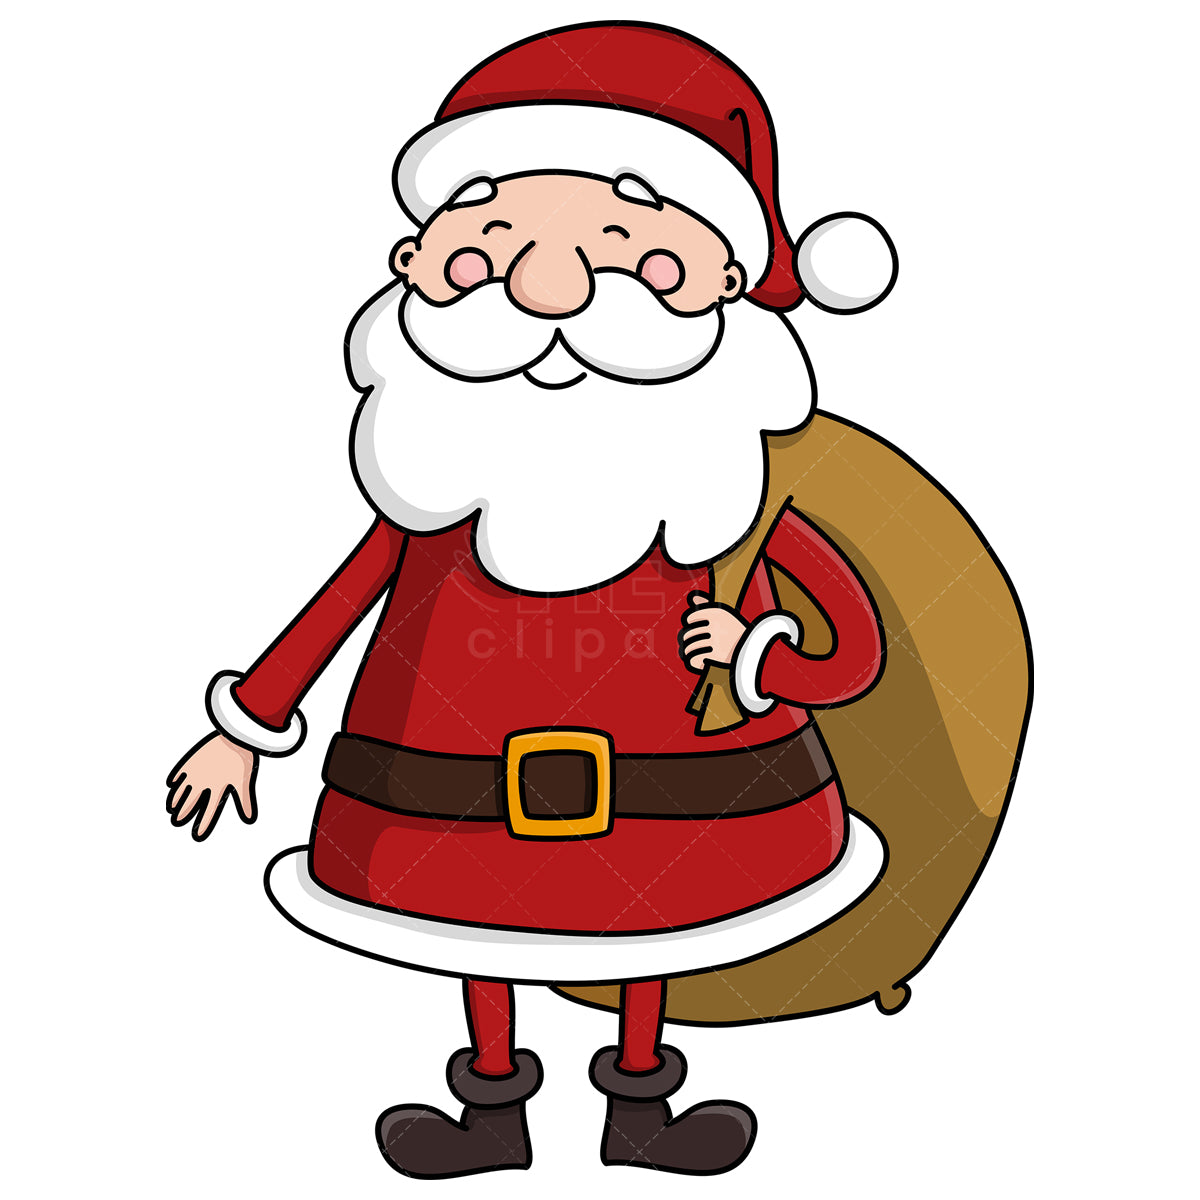 Royalty-free stock vector illustration of  a cute santa claus with gifts sack.